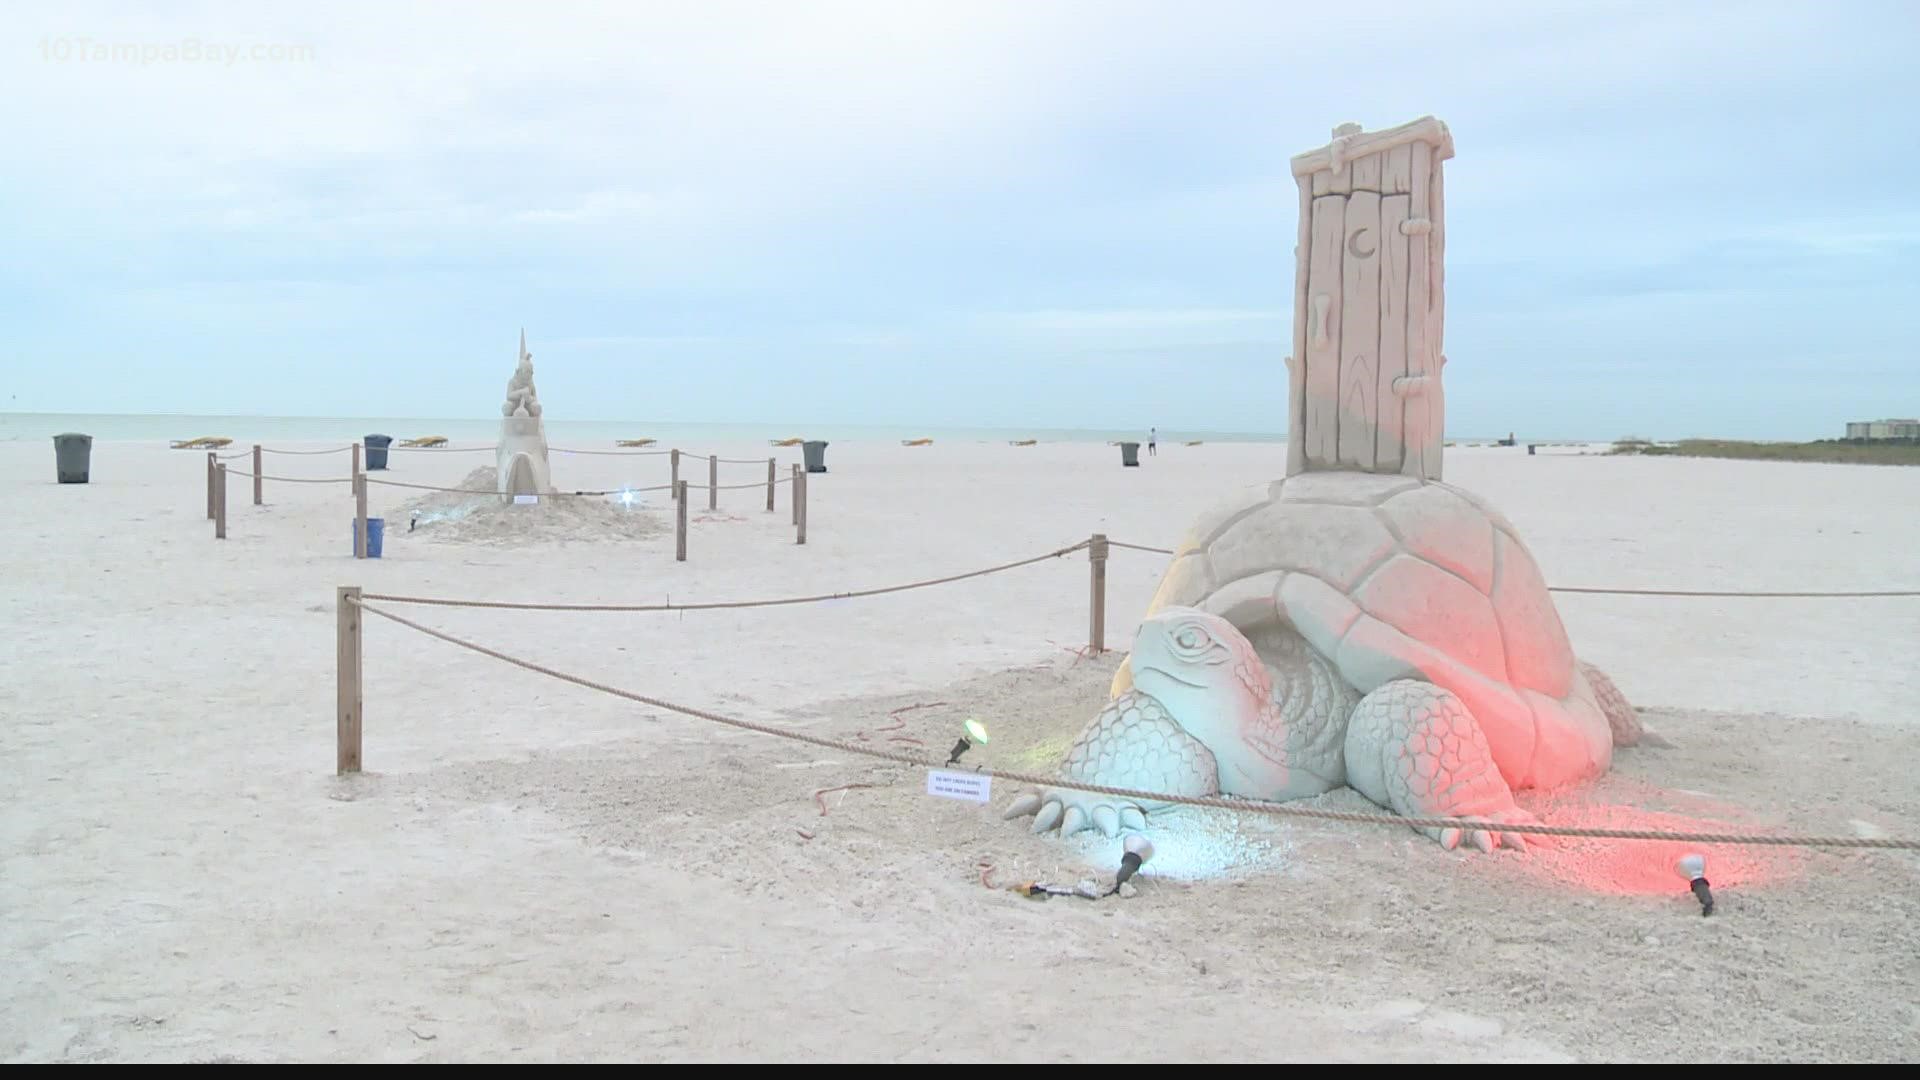 Master sand sculptors have transformed 300 tons of sand into "outSANDing" works of art.